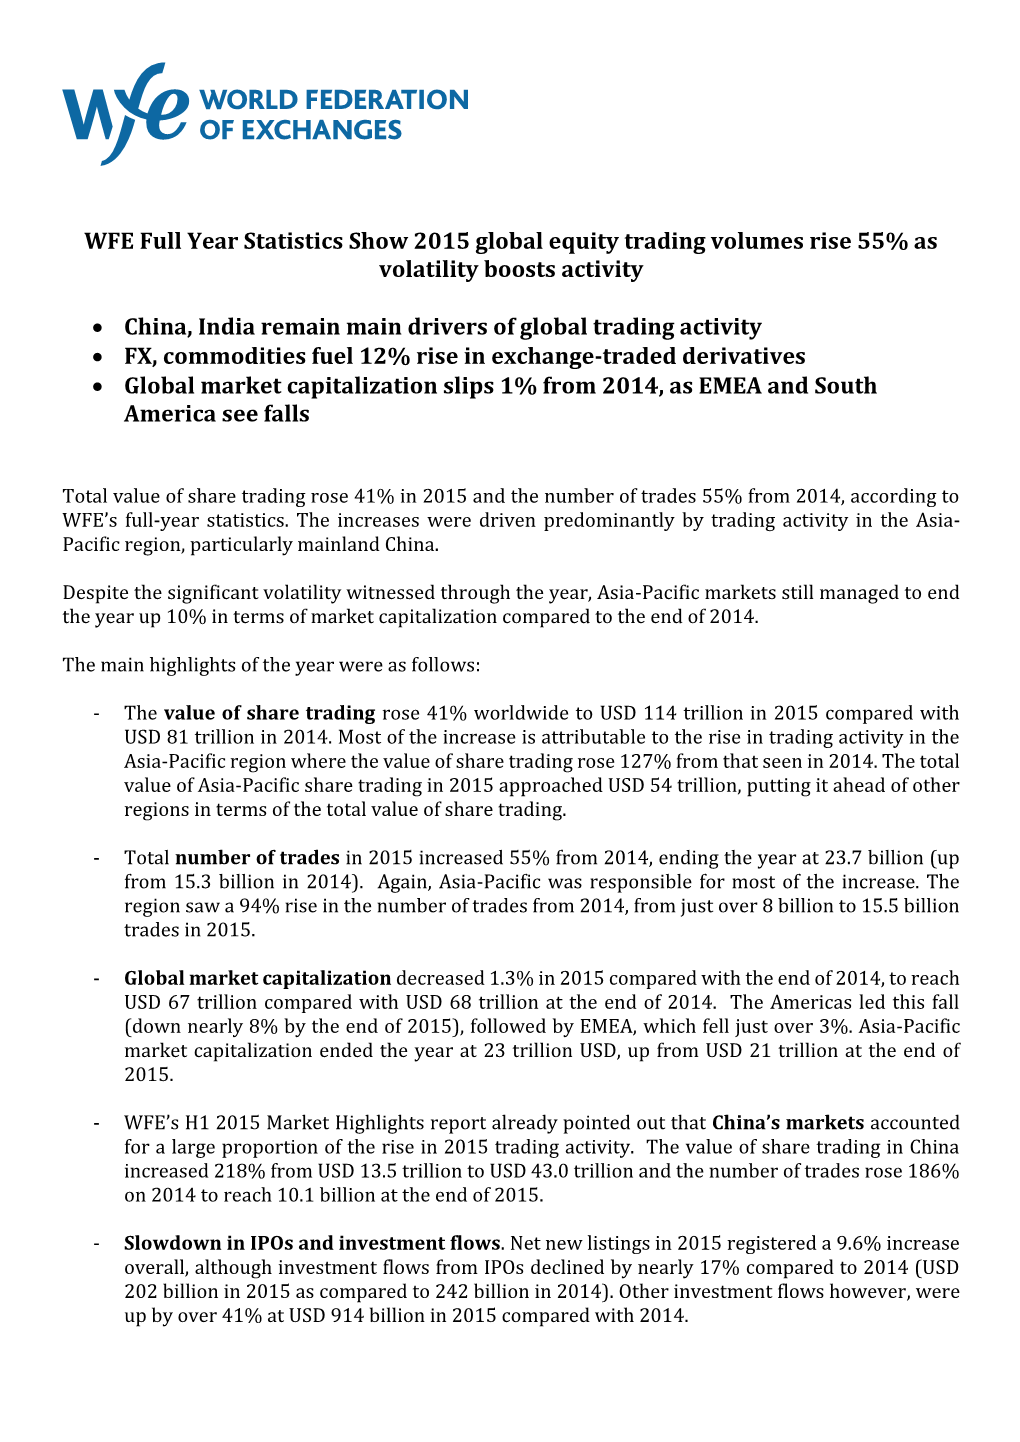 WFE Full Year Statistics Show 2015 Global Equity Trading Volumes Rise 55% As Volatility Boosts Activity